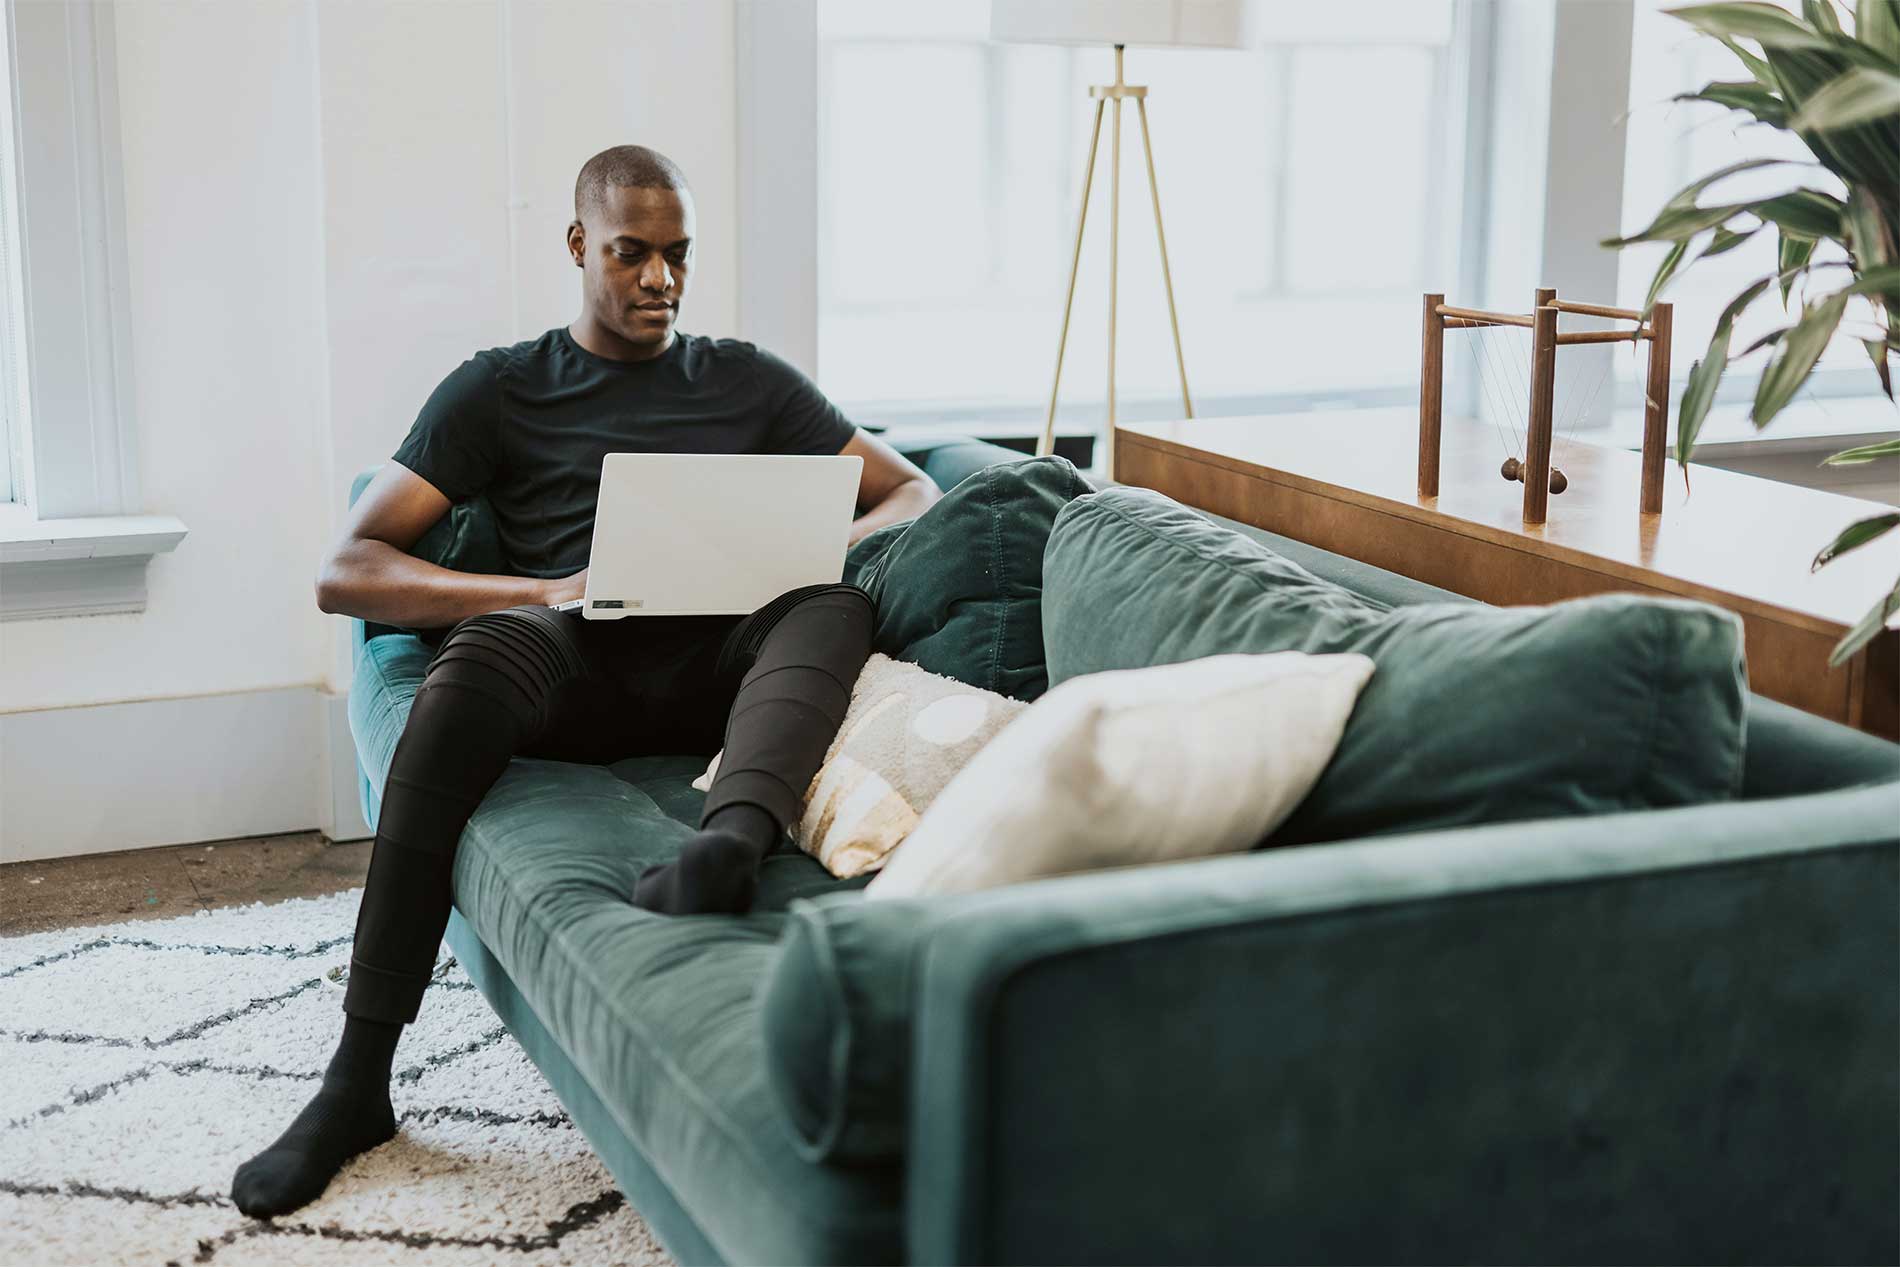 Man lounging on couch while on laptop